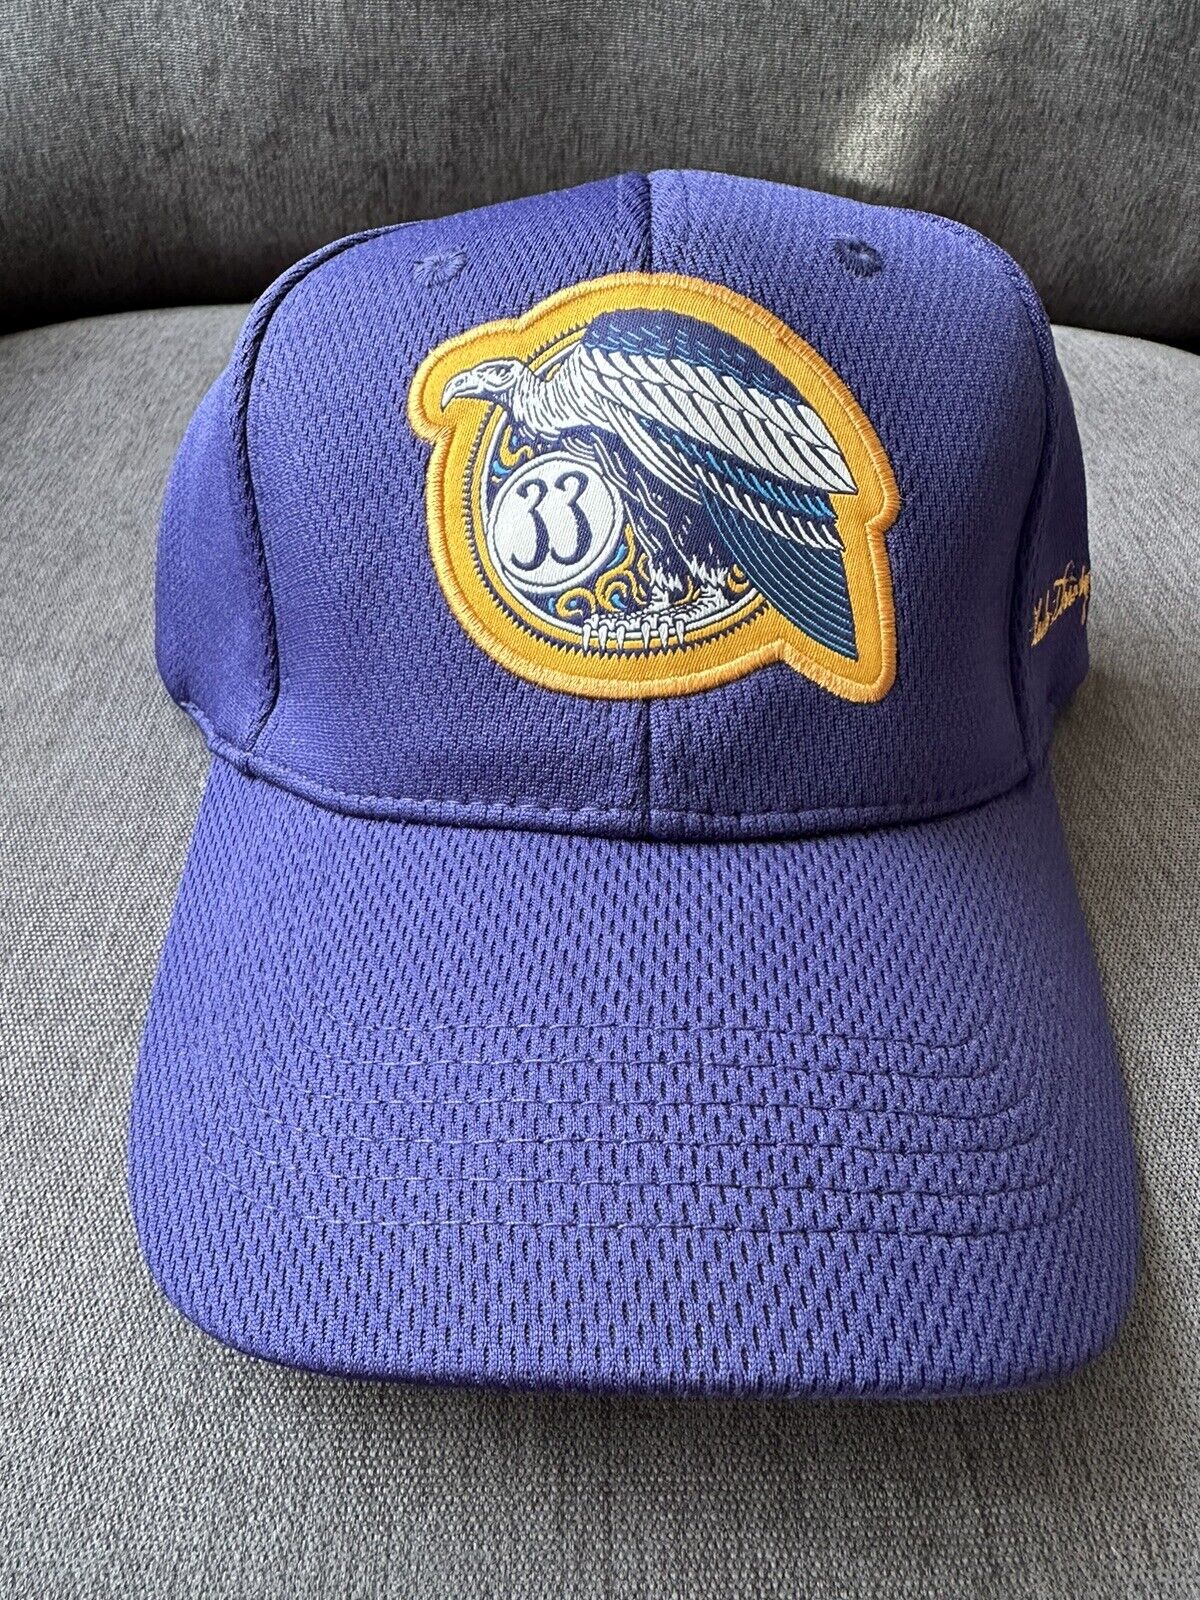 DISNEYLAND CLUB 33 EXCLUSIVE 2024 BRAND NEW HAT NEVER WORN JUST PURCHASED